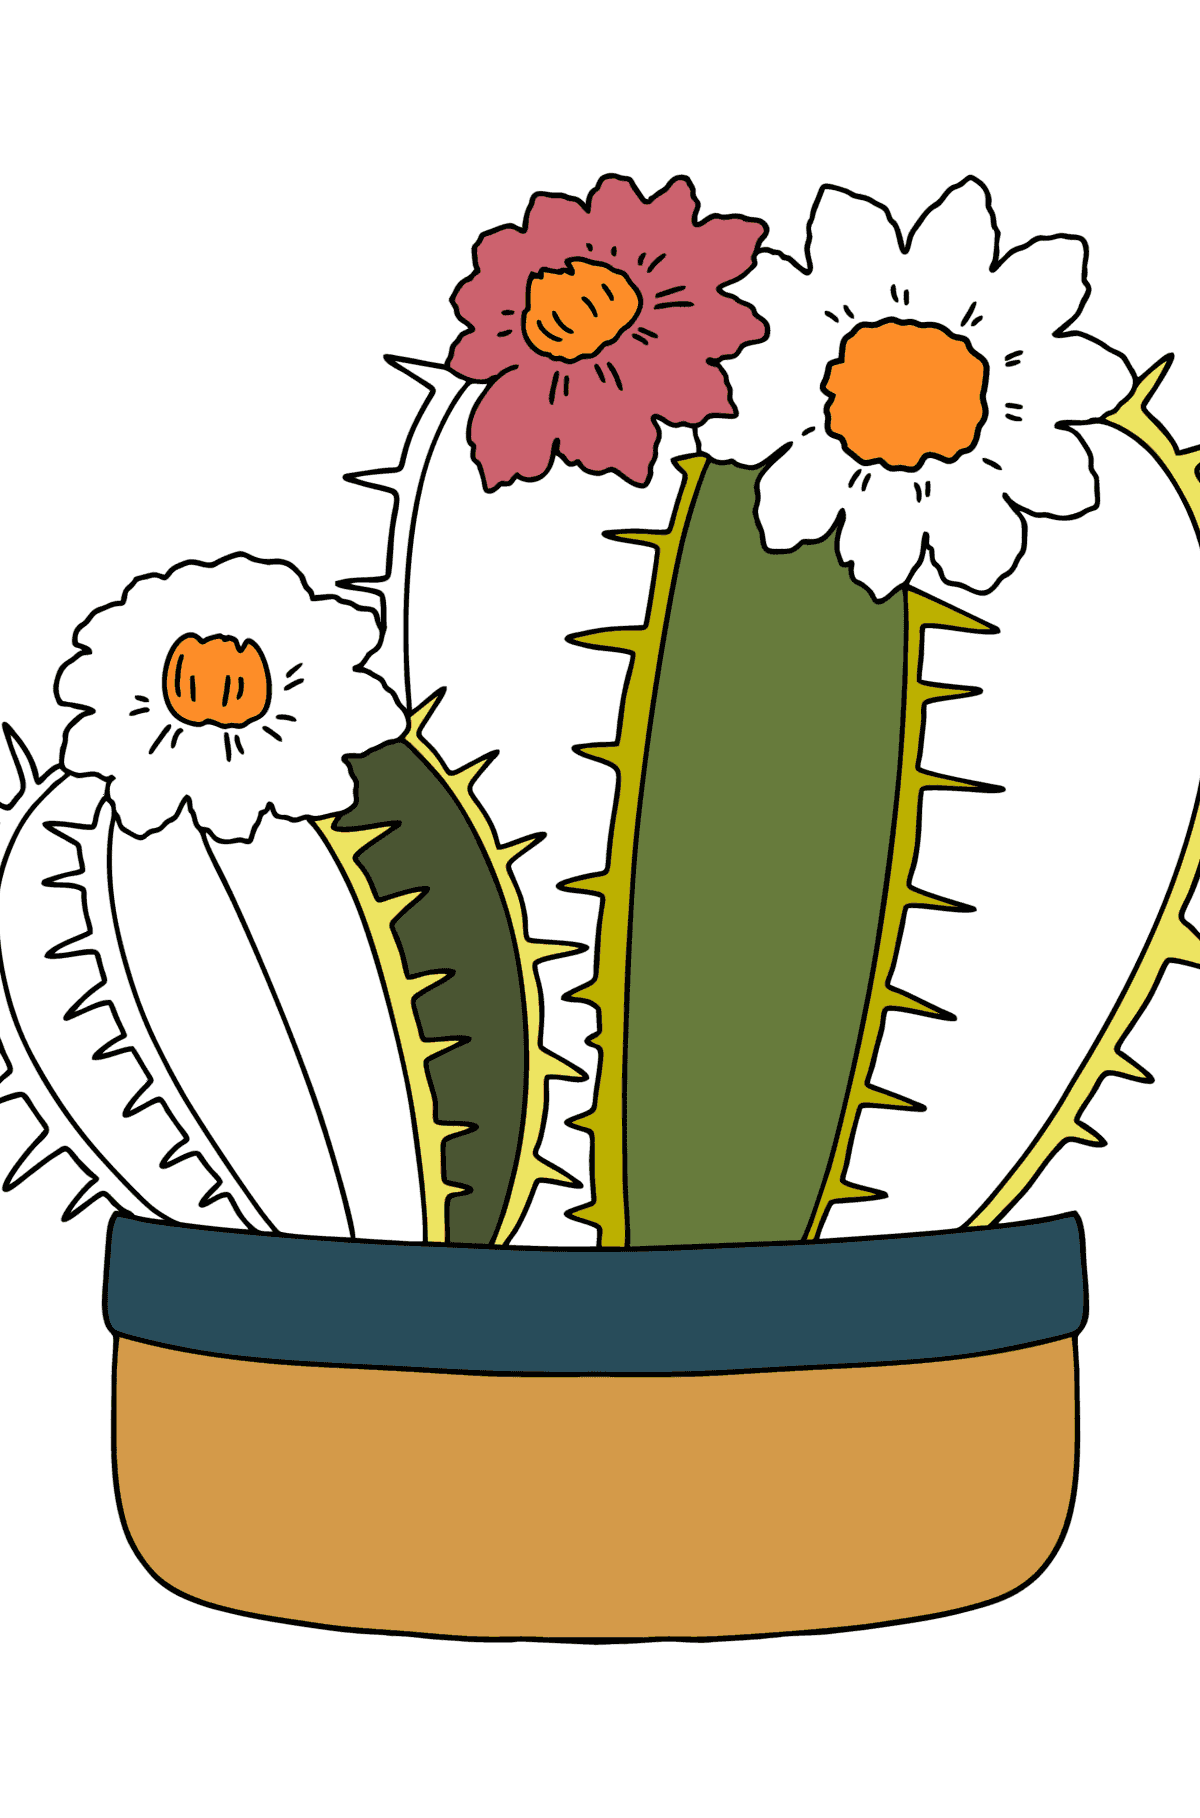 Cactus Flower coloring page - Coloring Pages for Kids